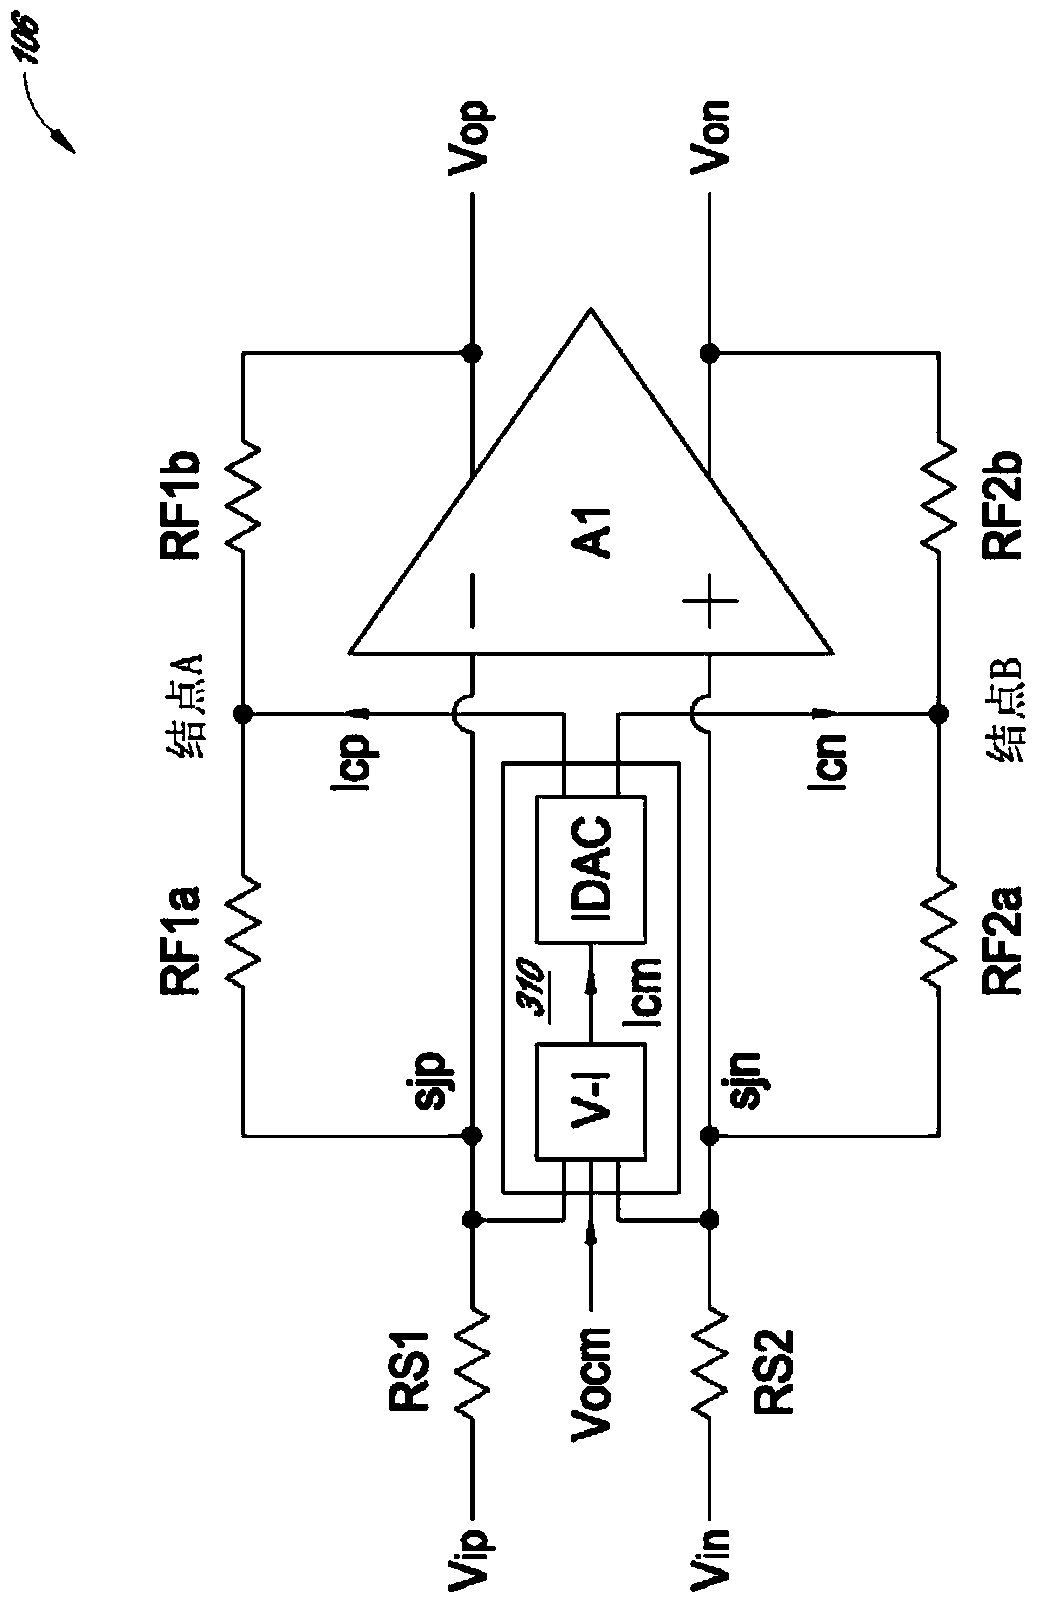 Apparatus and method for improving common mode rejection ratio